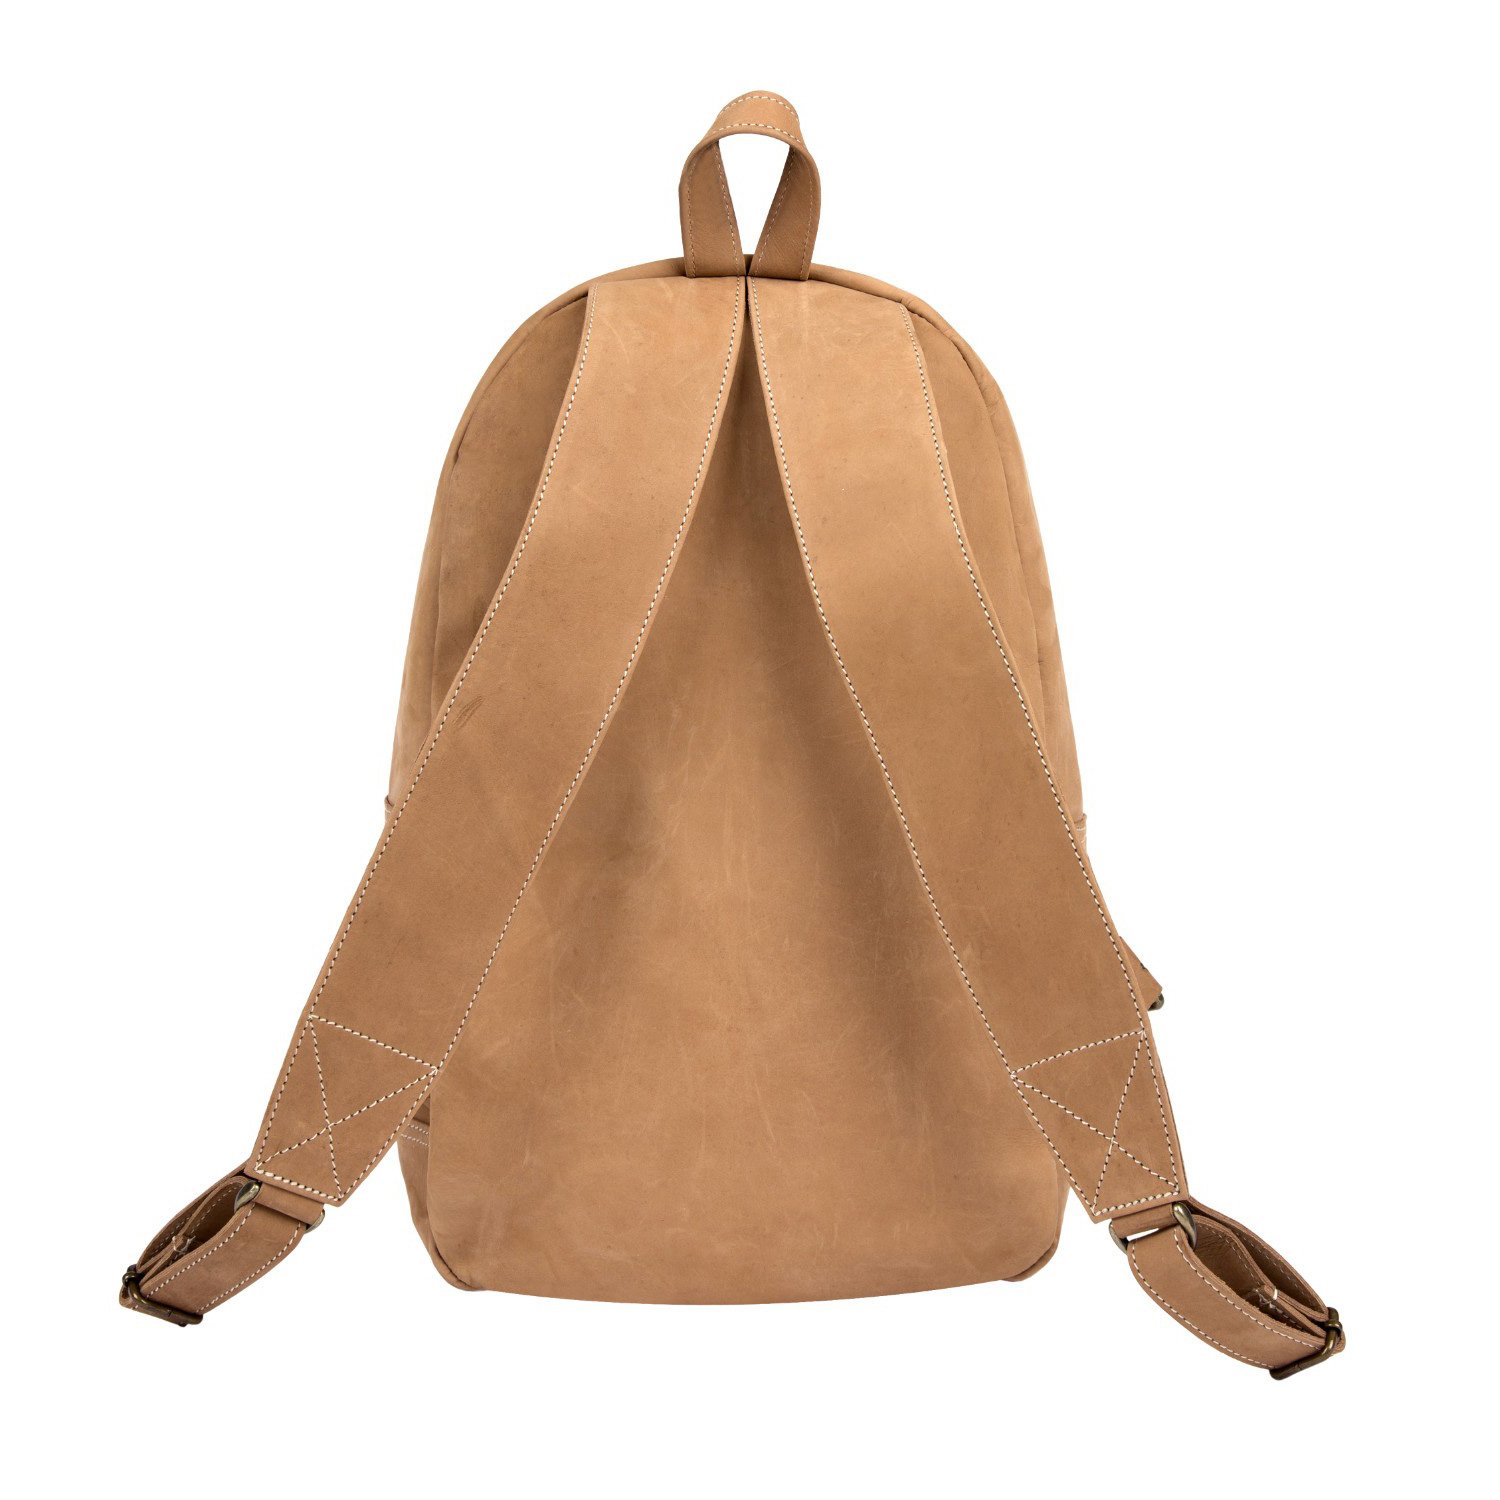 Suede leather backpack for. Bookbag clipart 5 bag